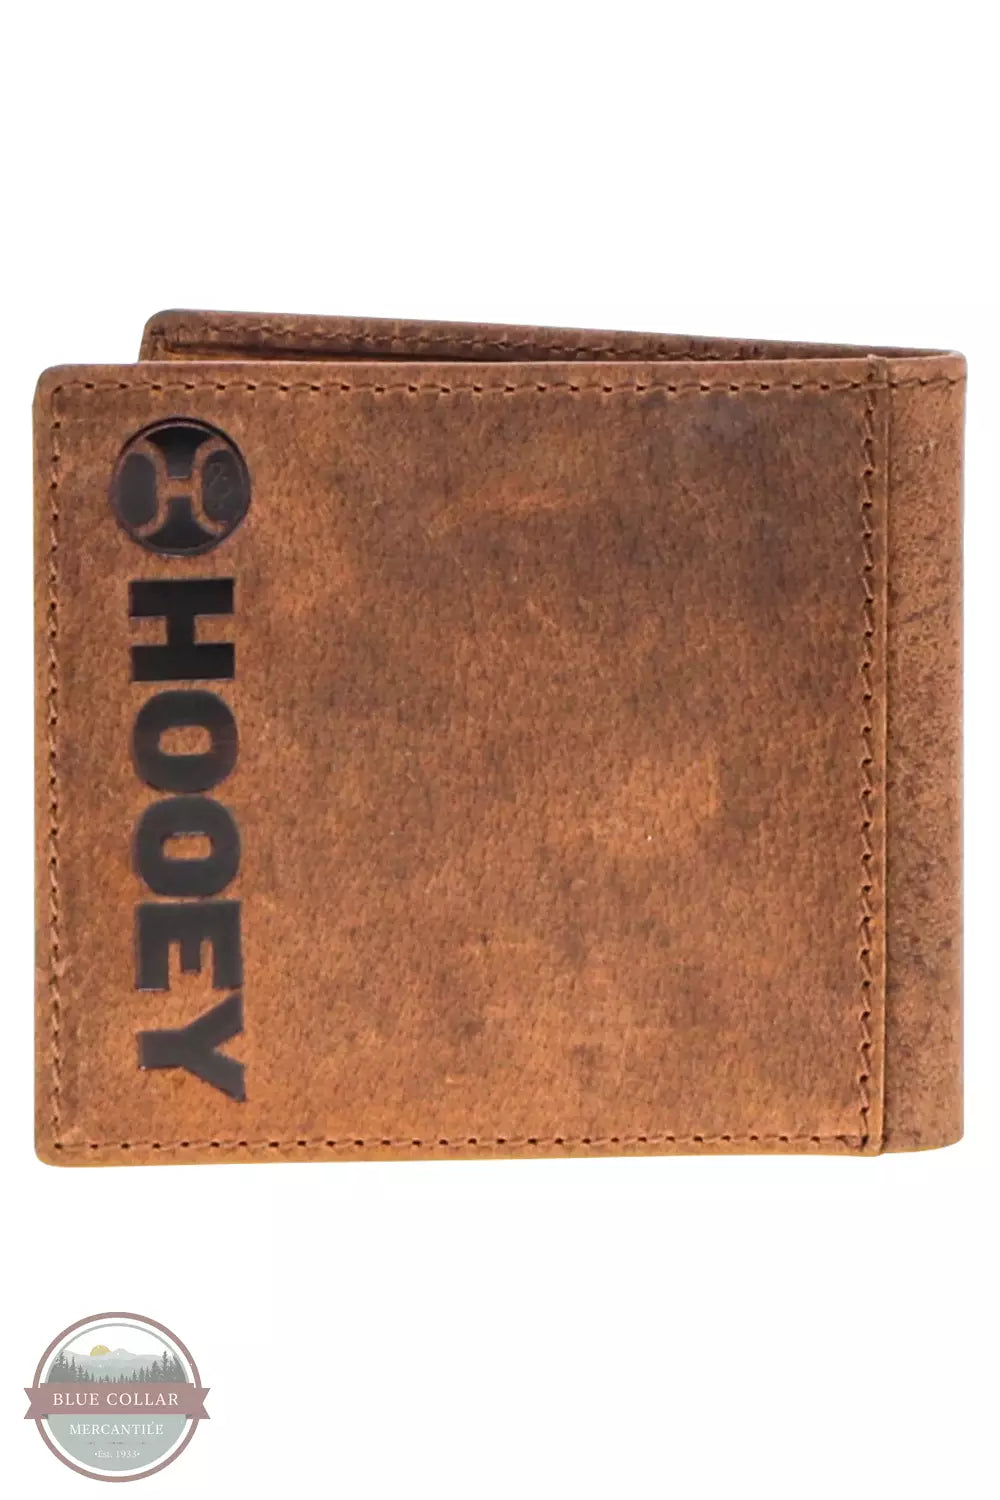 Hooey HBF016 Ranger Bi-Fold Wallet with Embroidery Tan Back View